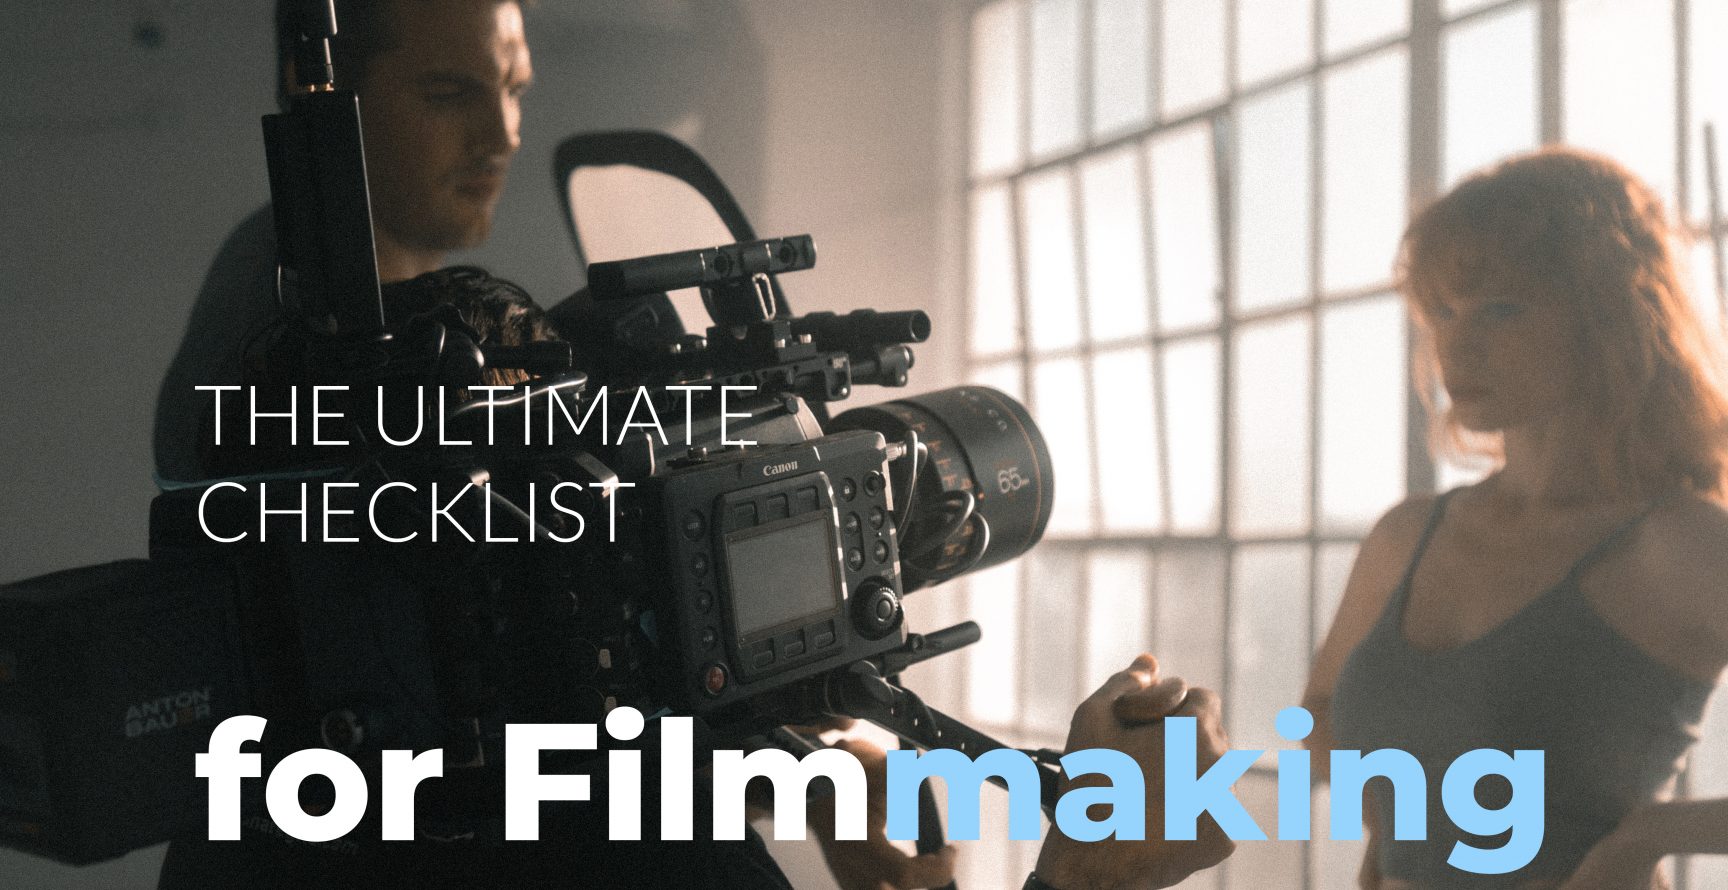 The ultimate checklist for filmmaking - camerman shoots actress